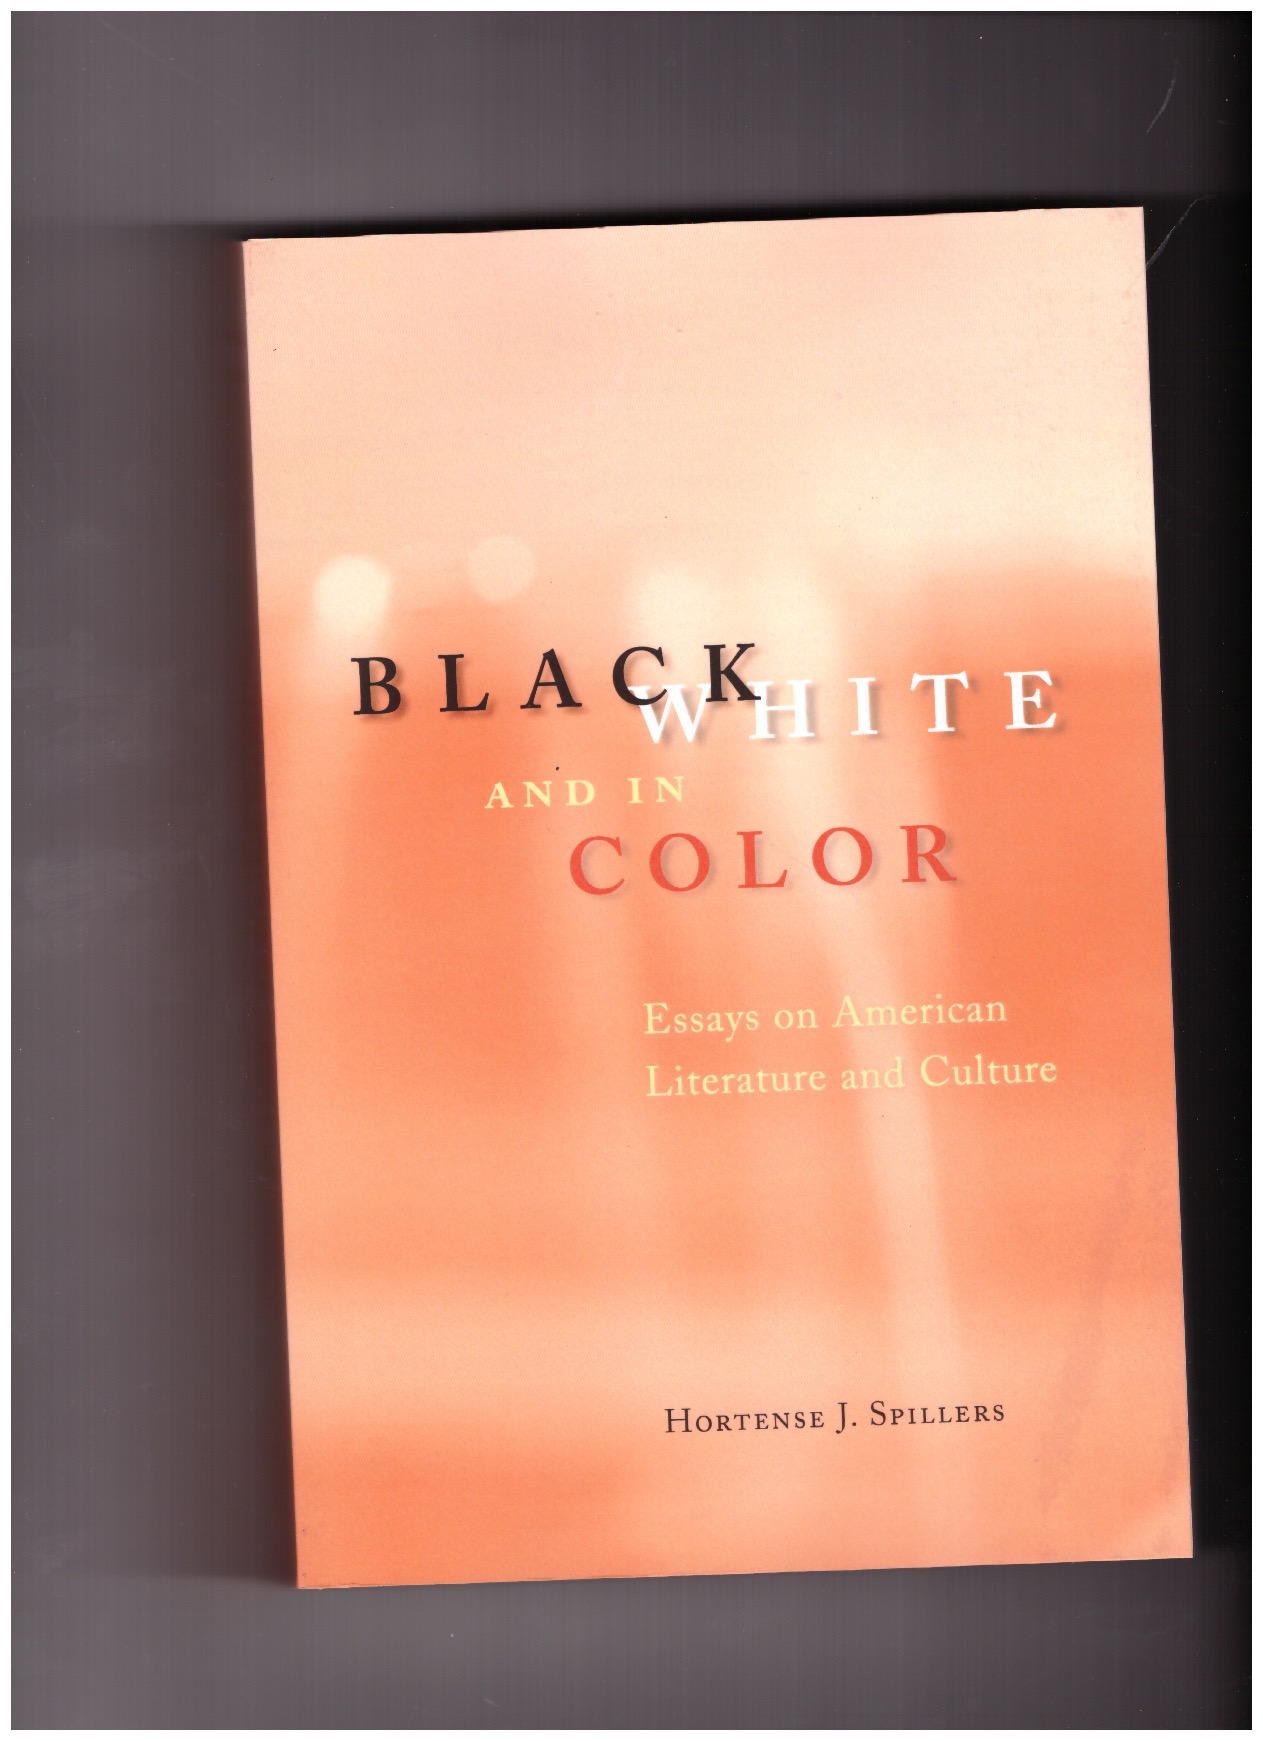 SPILLERS, Hortense J. - Black, White and in Color - Essays on American Literature and Culture